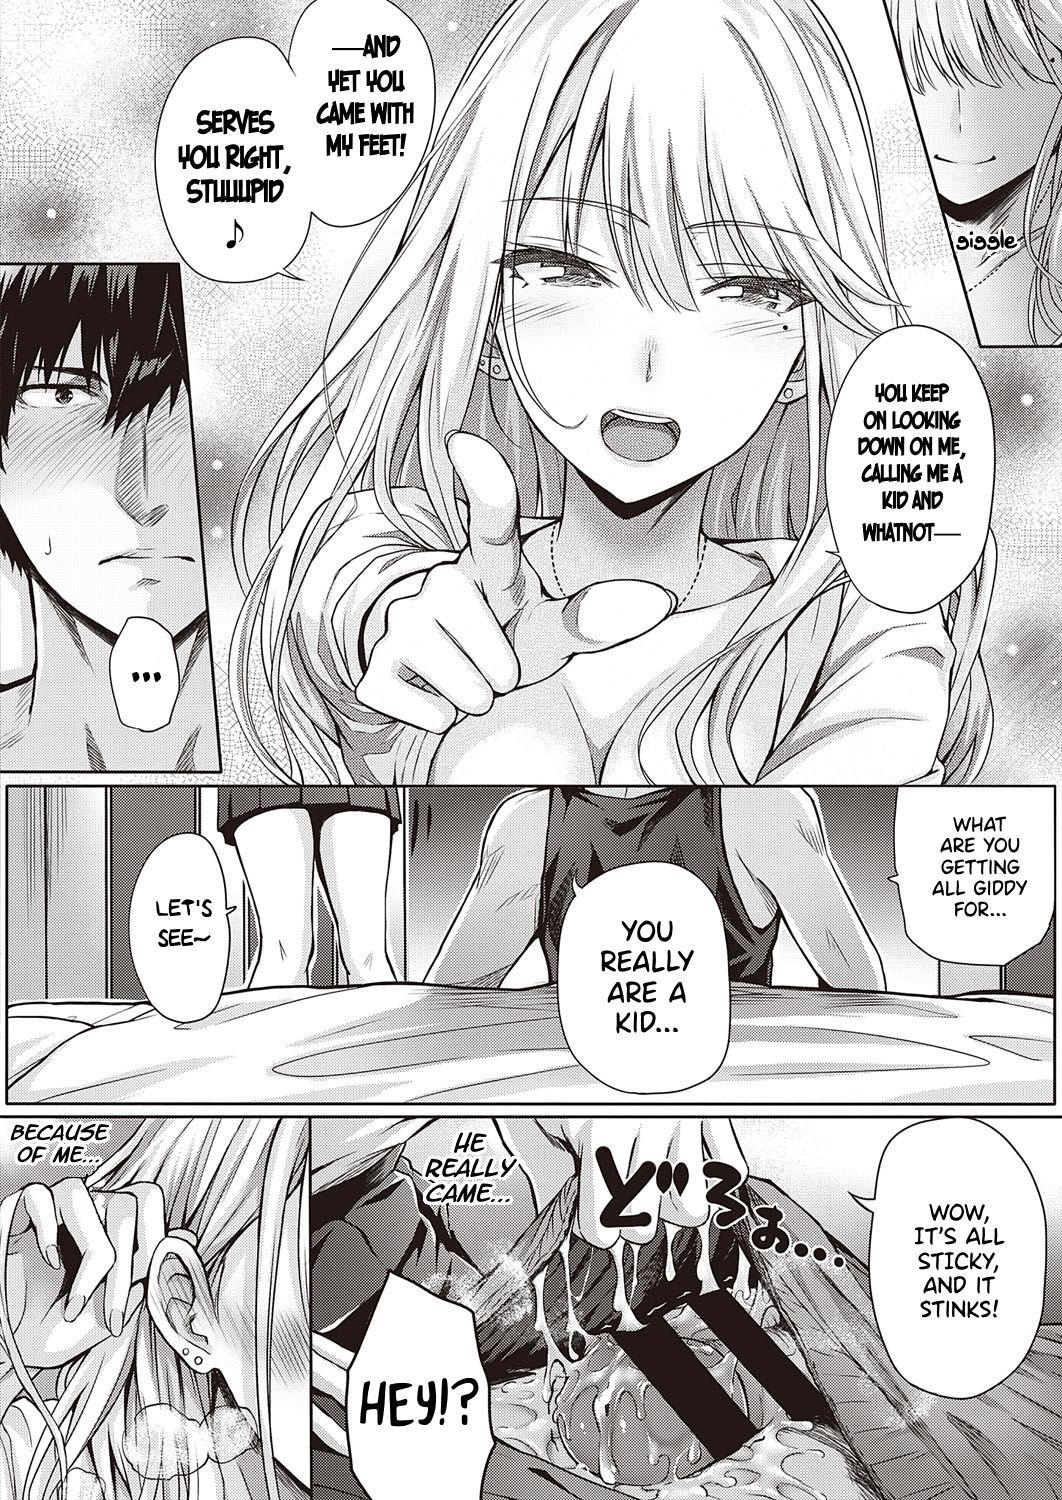 Jacking Off Re:Hatsukoi | Re:First Love Hardcorend - Page 10